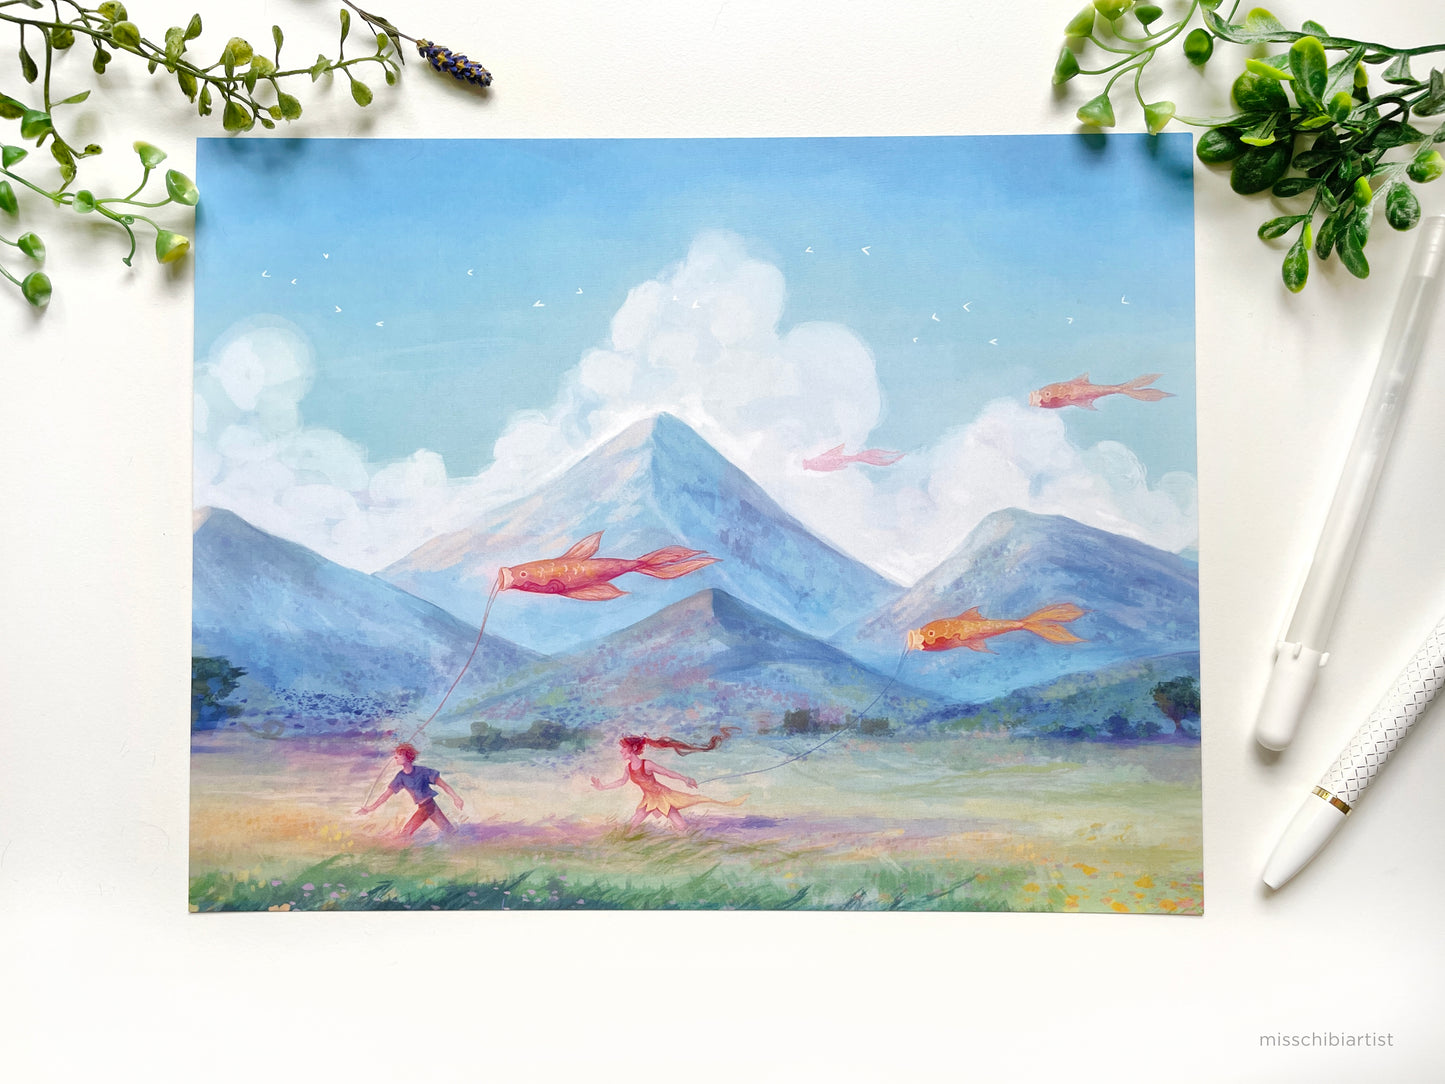 The Carefree illustration shows two children running across a peaceful meadow, holding orange fish kites. The girl has a yellow dress and long brown hair and the boy has short brown hair and a blue shirt. Tall blue mountains rise up in the distance. Available as an art print by MissChibiArist.